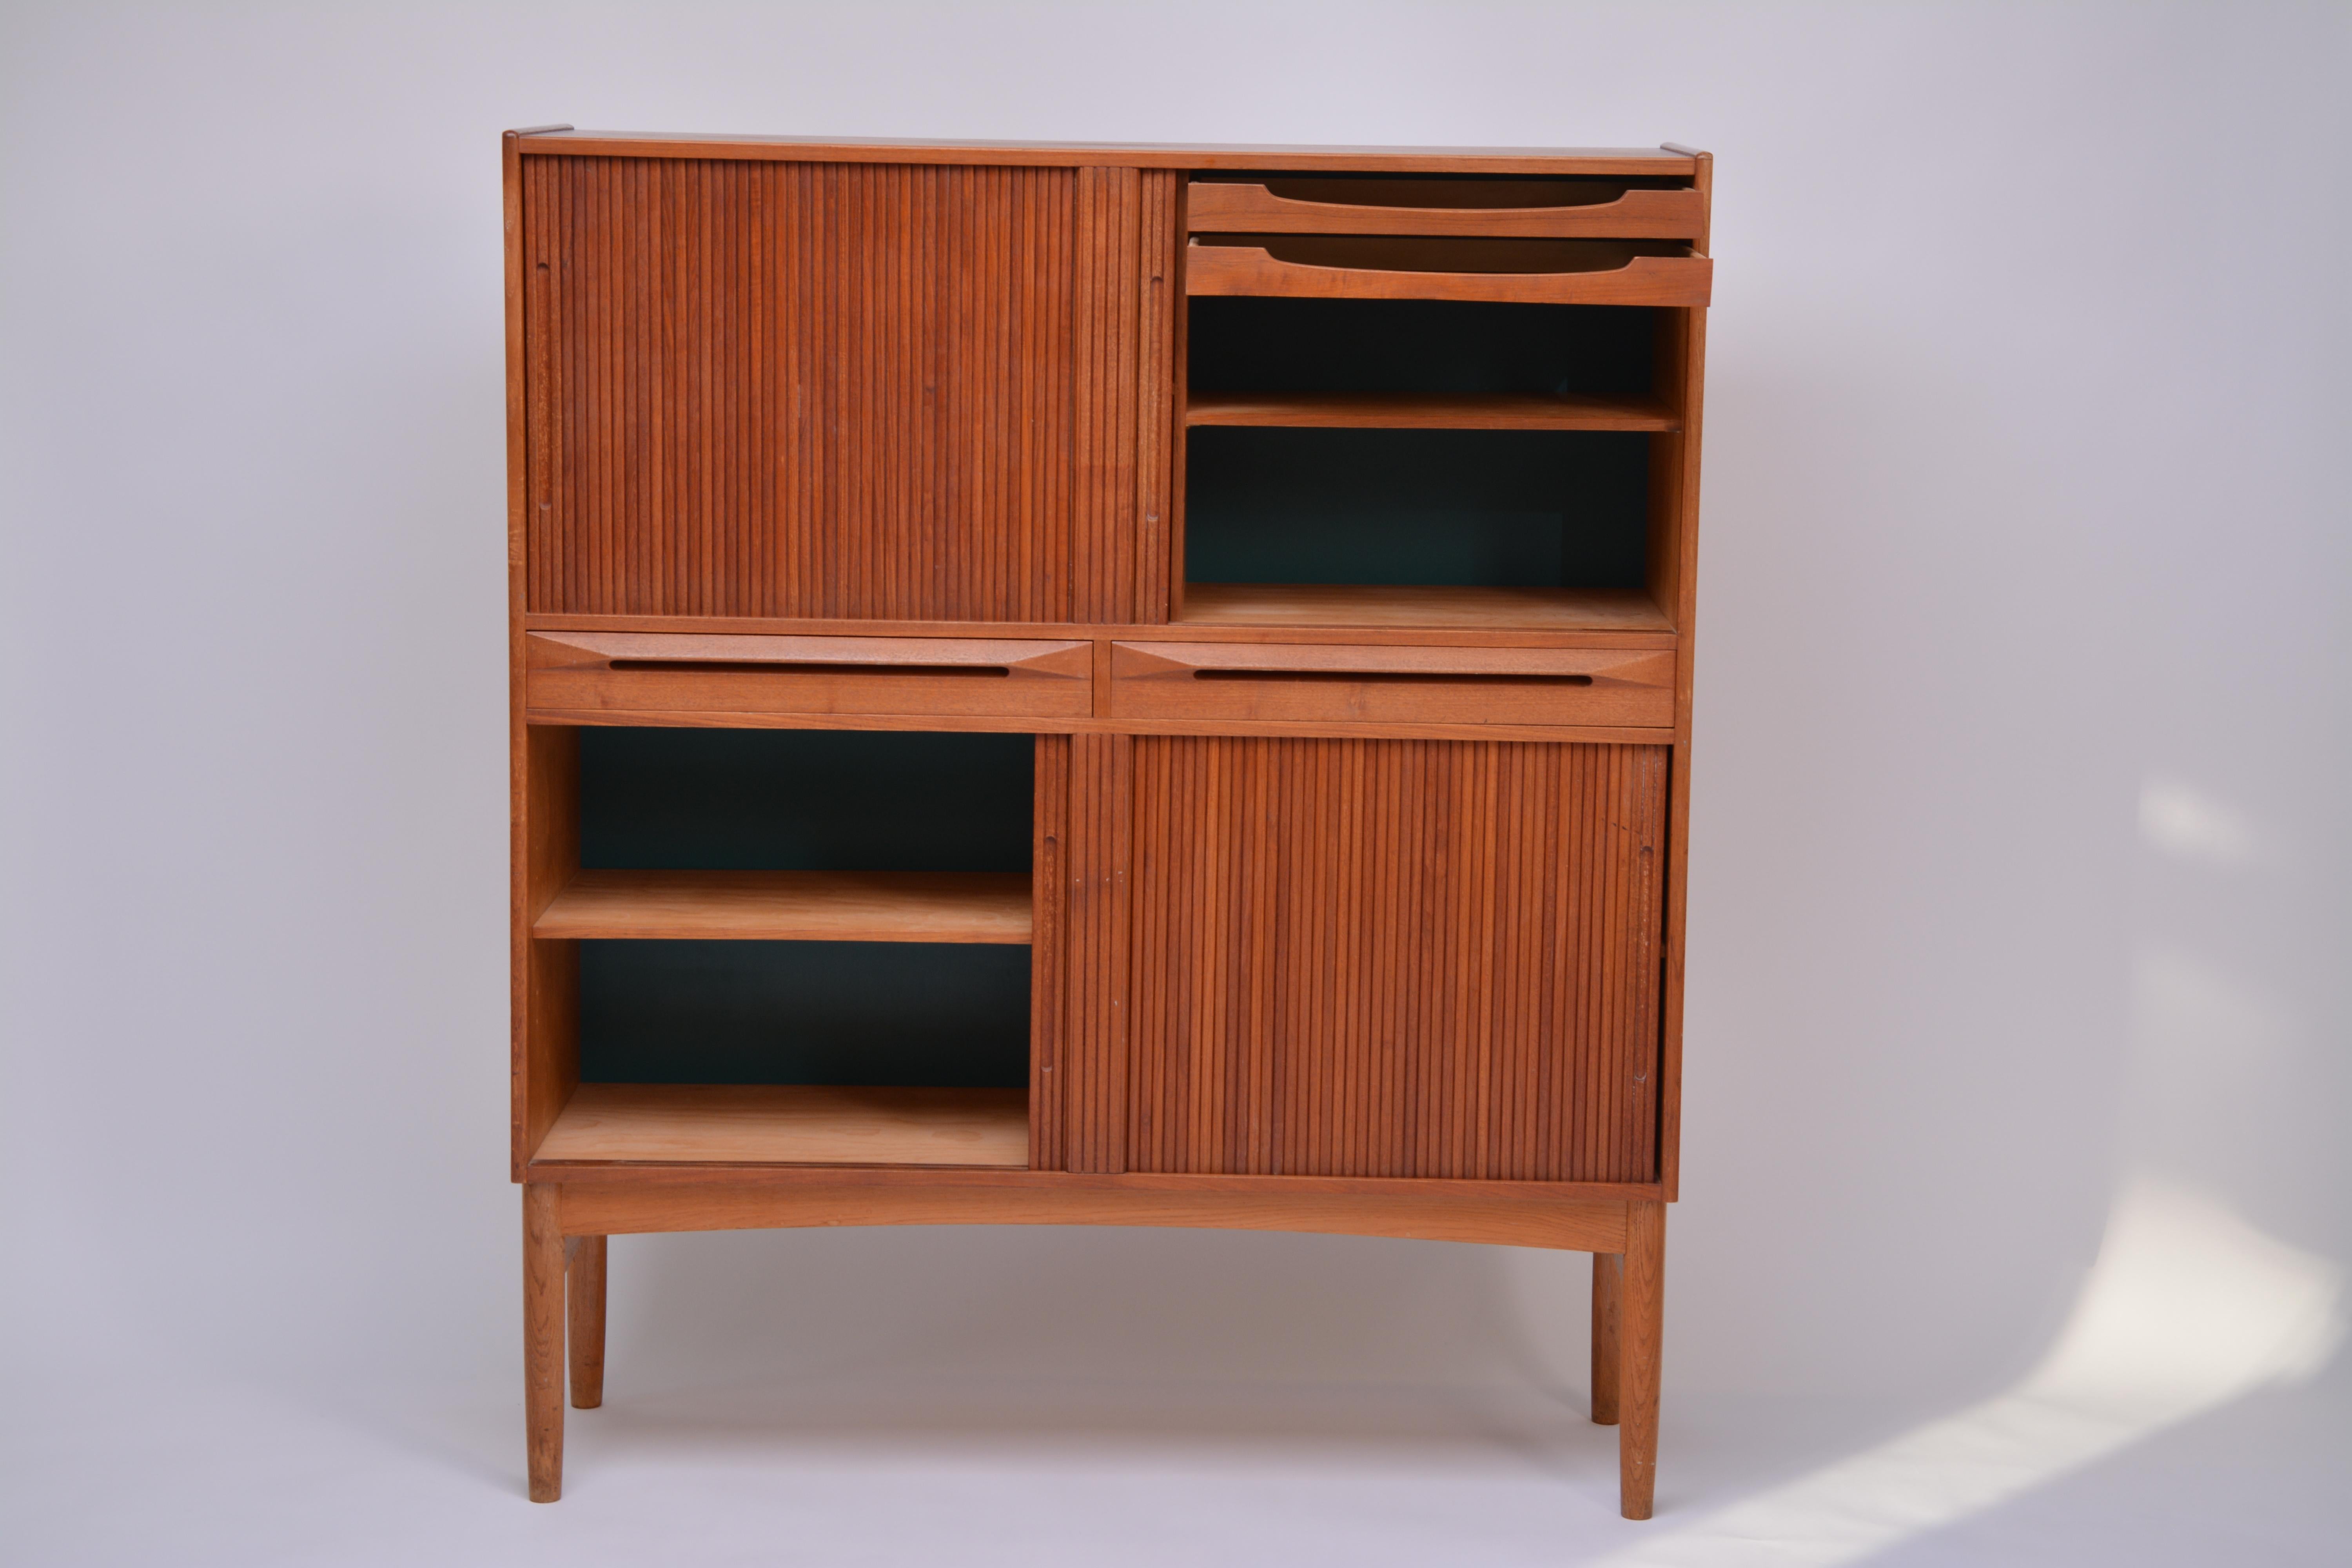 Tall teak cabinet with beech frame on beech shoes. Front with two drawers and four tambour doors. Inside with adjustable shelves and greenish blue lacquered back cover. Manufactured by Fredericia Stolefabrik.